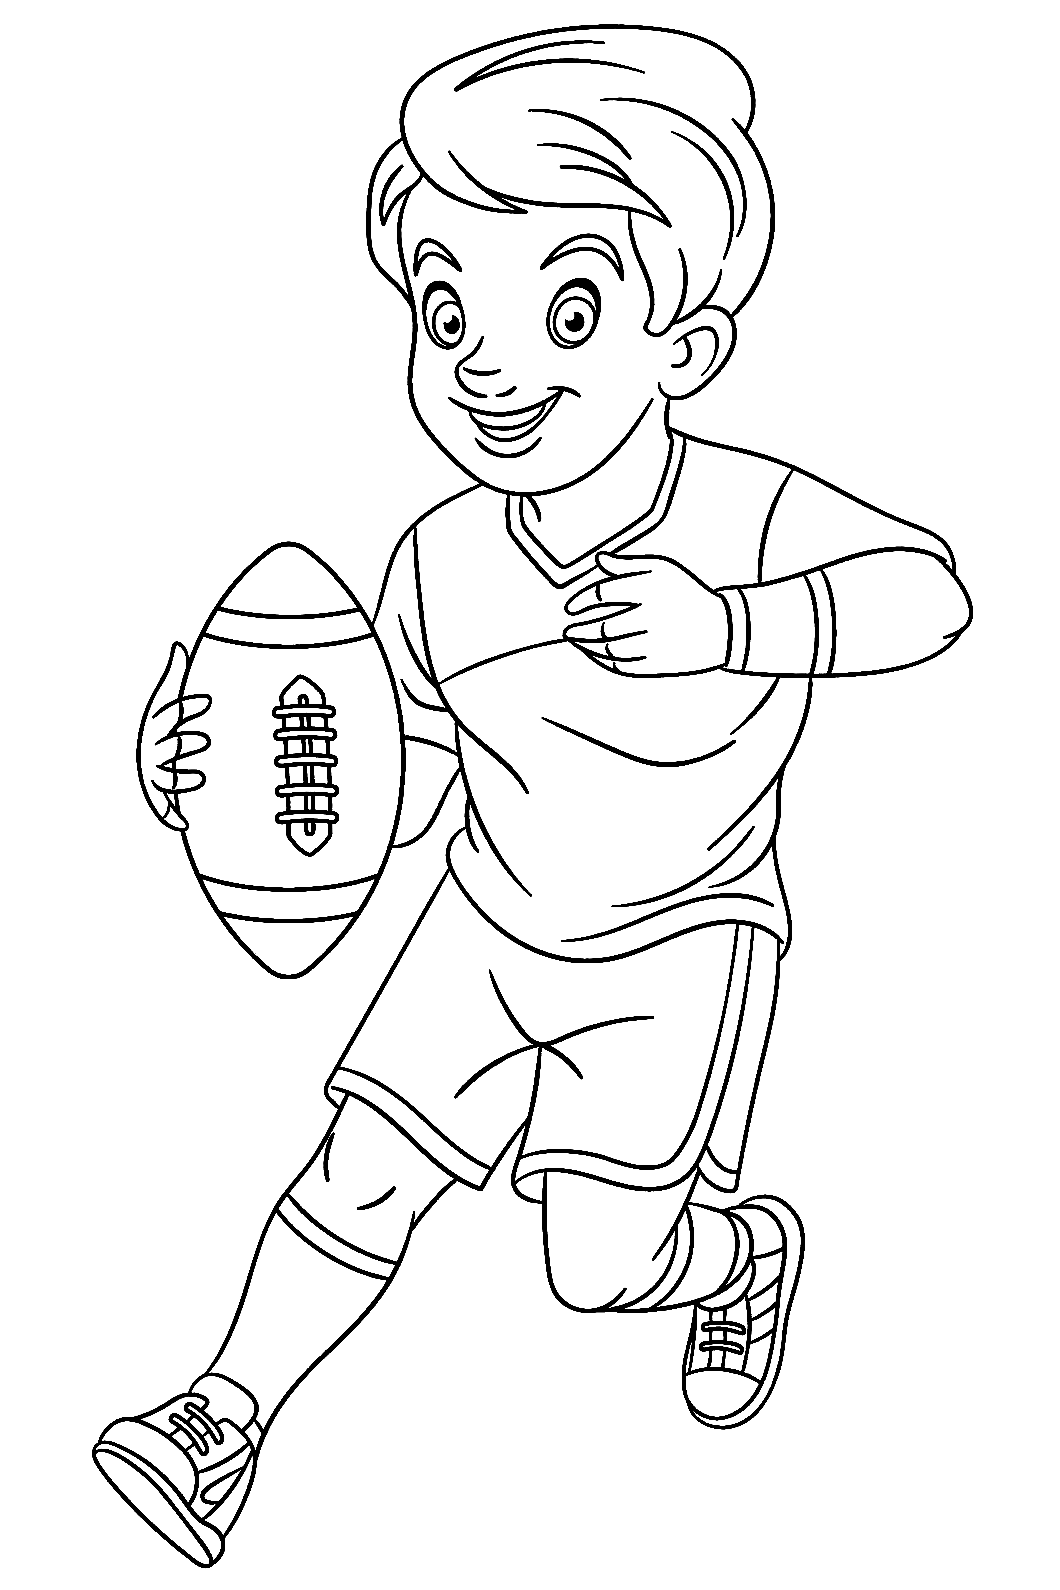 Menino jogando rugby from Rugby